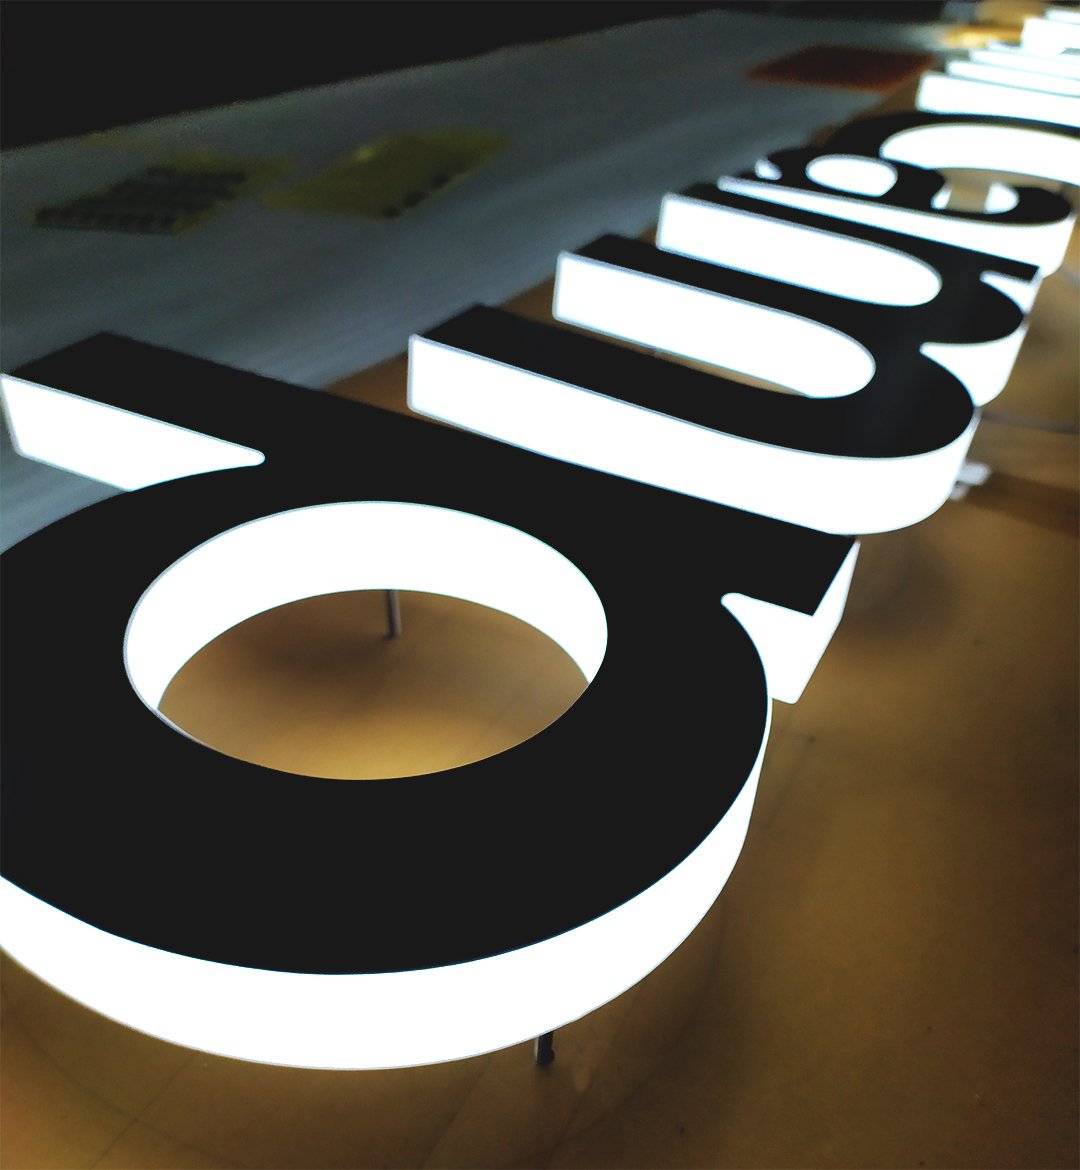 Brushed metal sign with edge lit lighting for the operations center of Slack, an American cloud-based set of team collaboration tools and services.